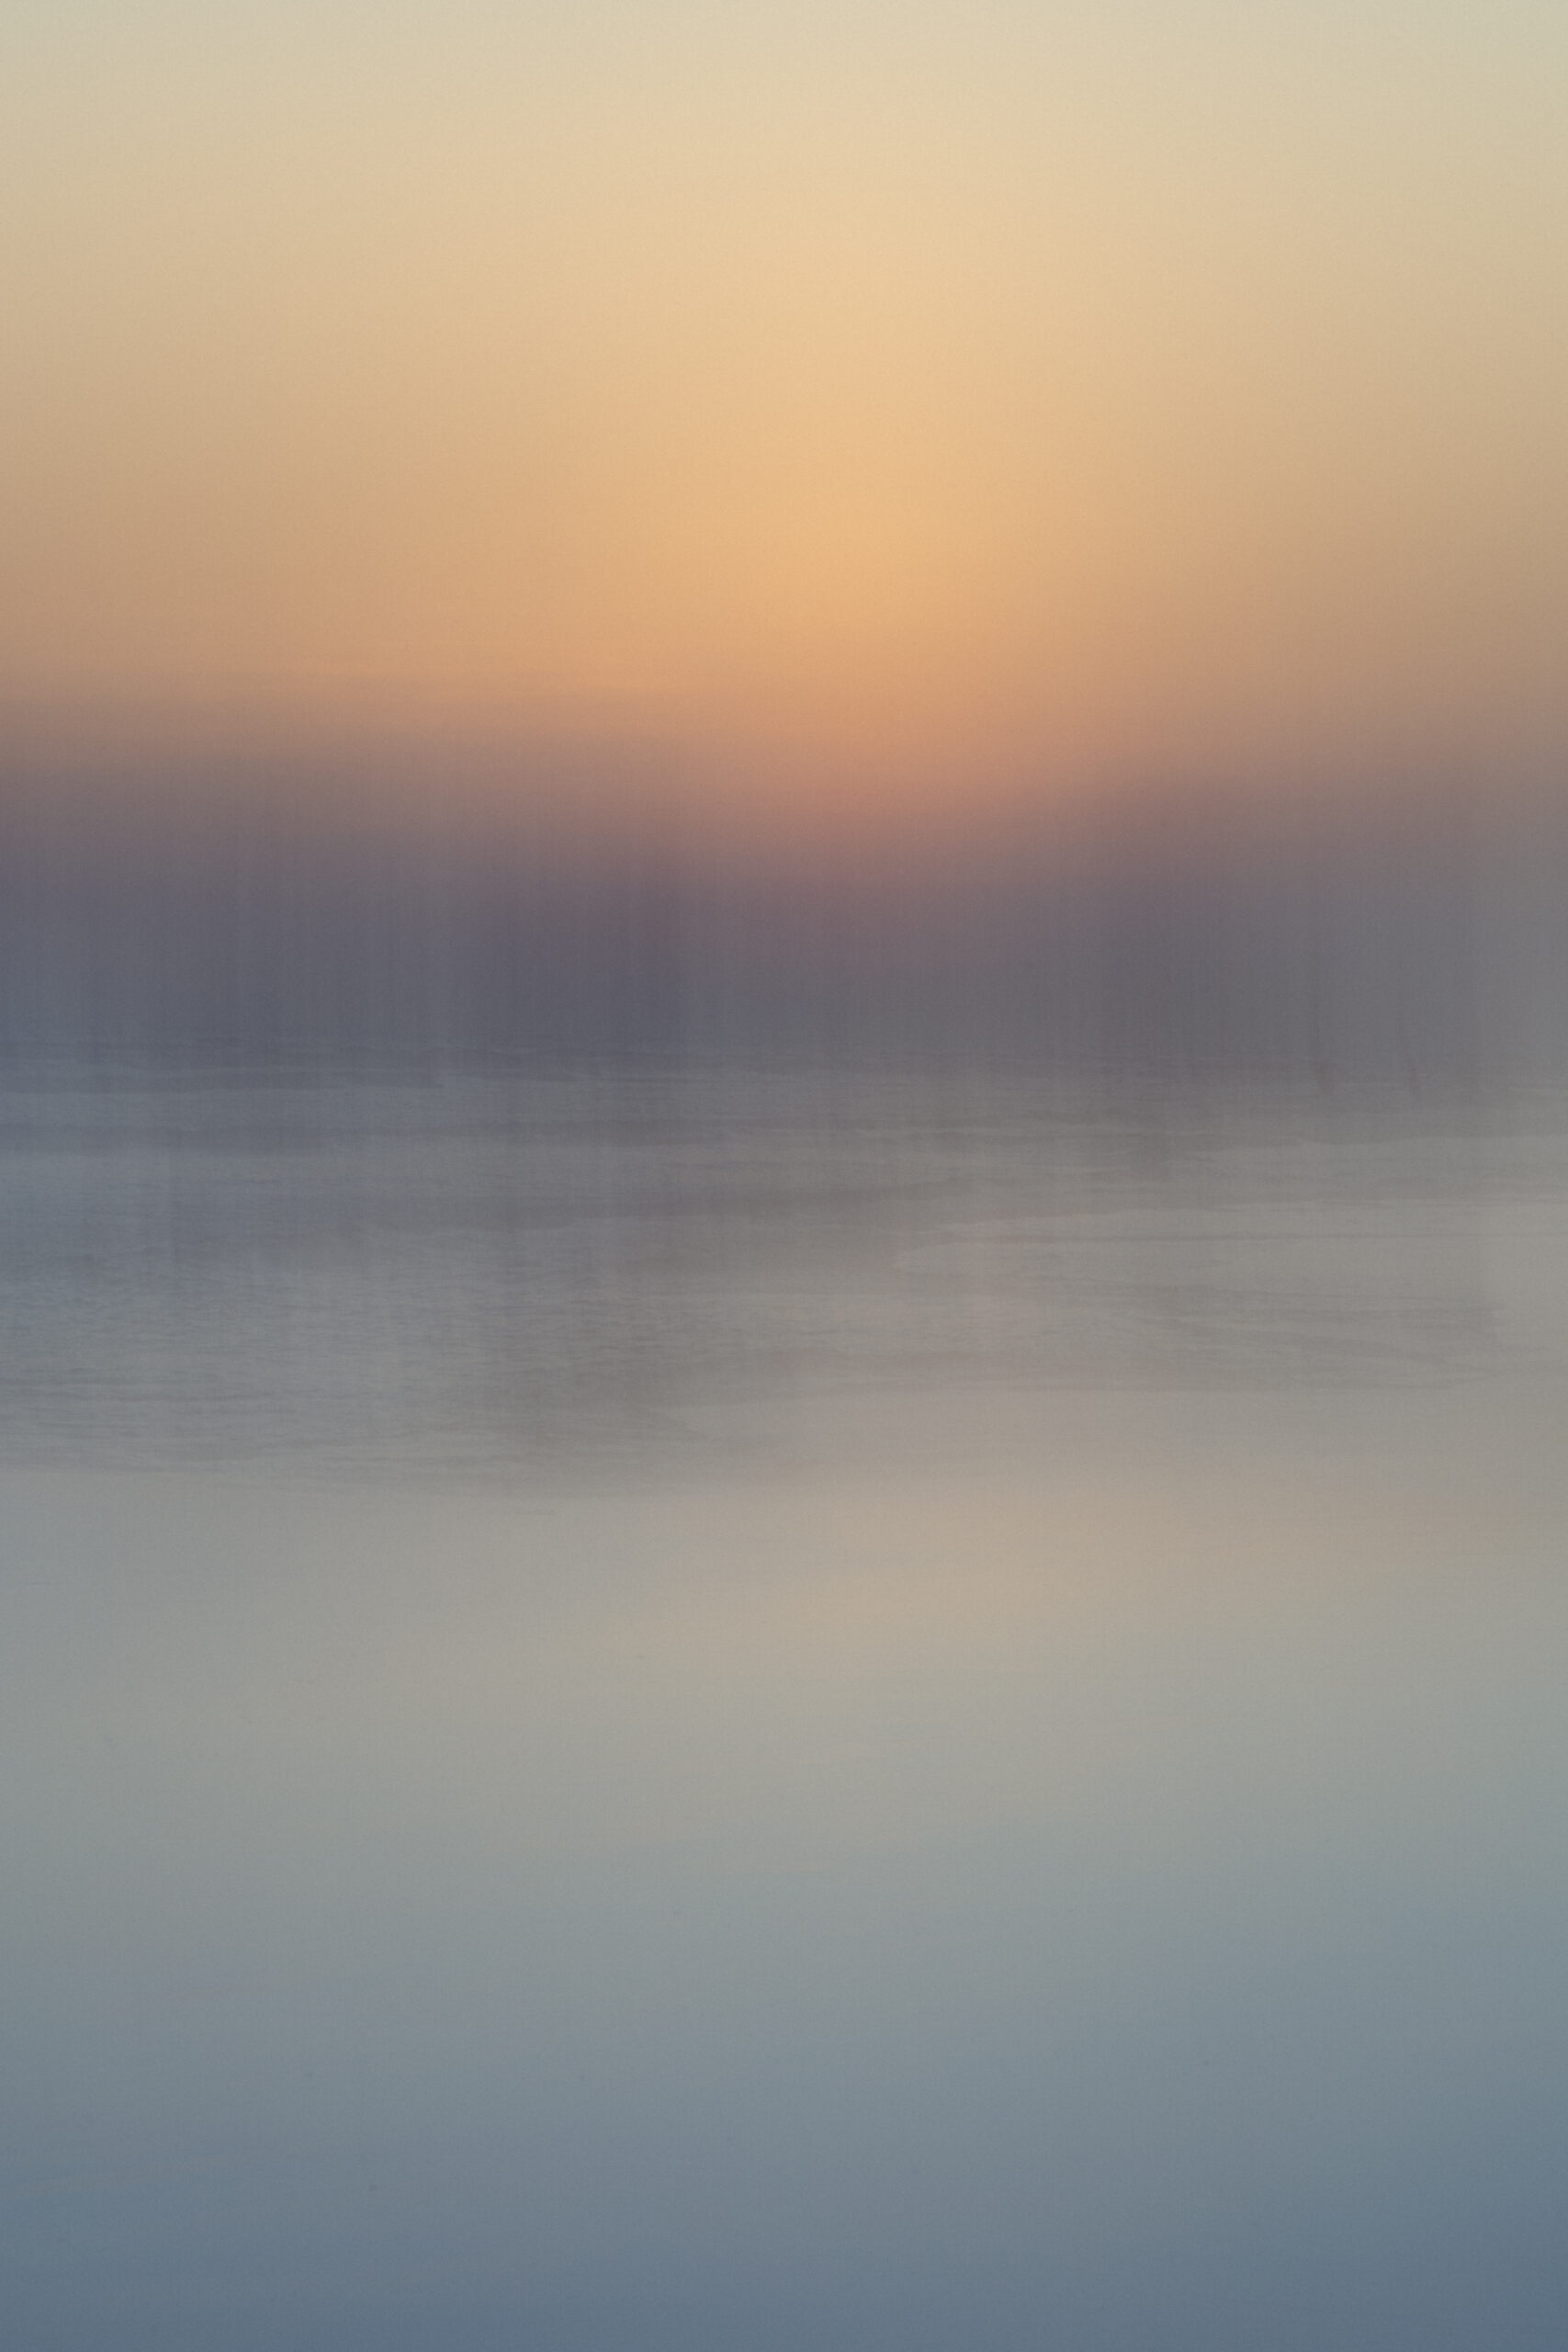 Serene abstract photography by Juan Tribaldos where he has blurred the image of an ocean and soft light of either a sunrise or a sunset into complete dreamy abstraction.